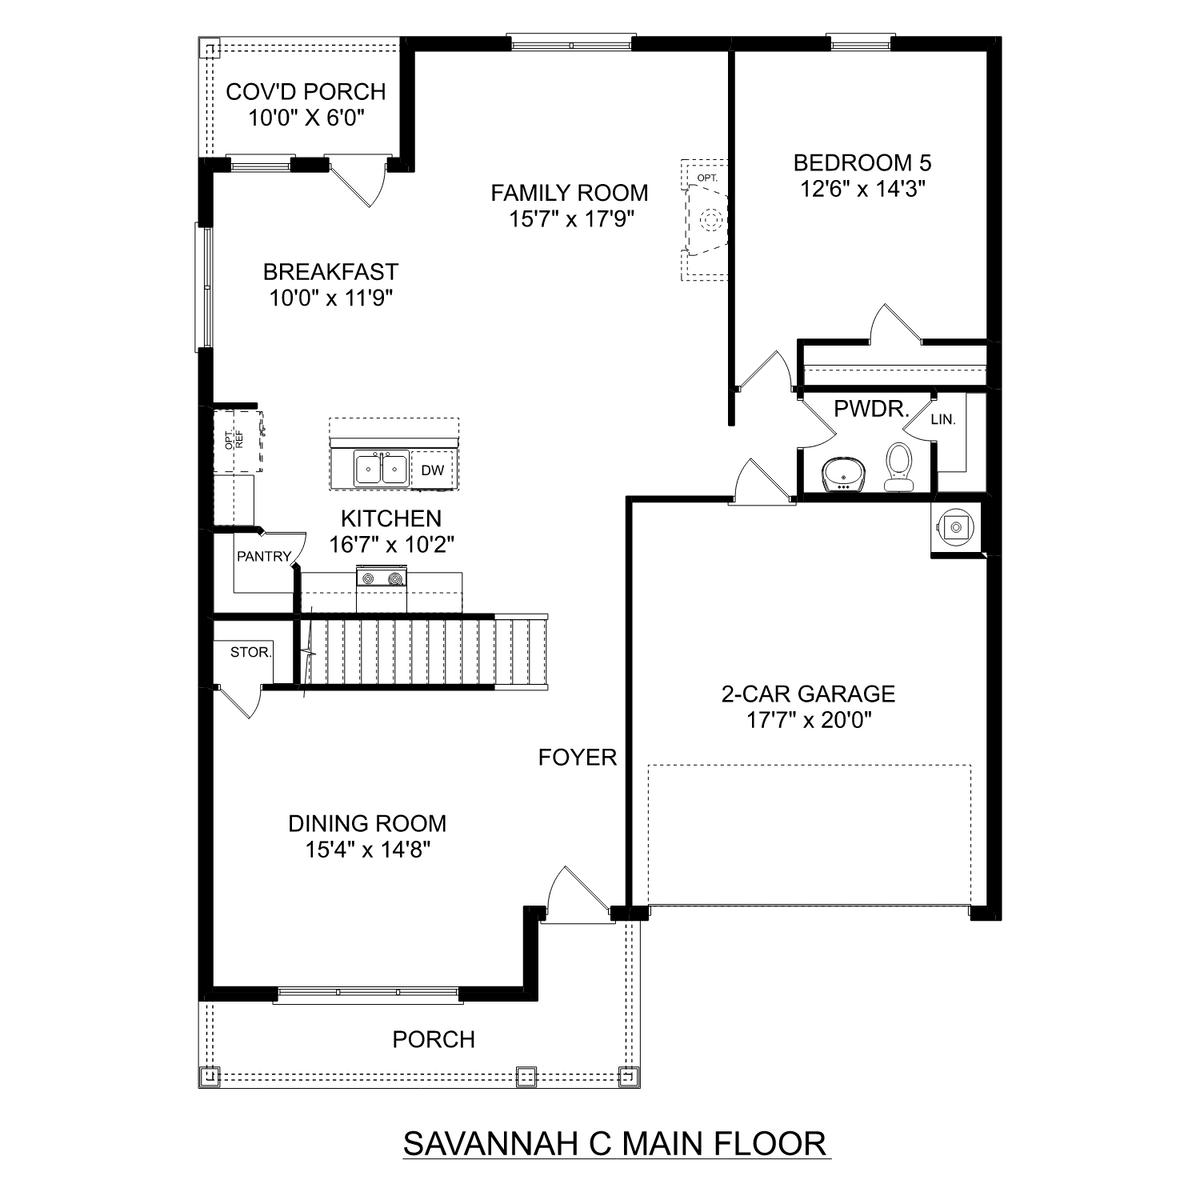 1 - The Savannah C floor plan layout for 157 Cherry Laurel Drive in Davidson Homes' Clearview community.